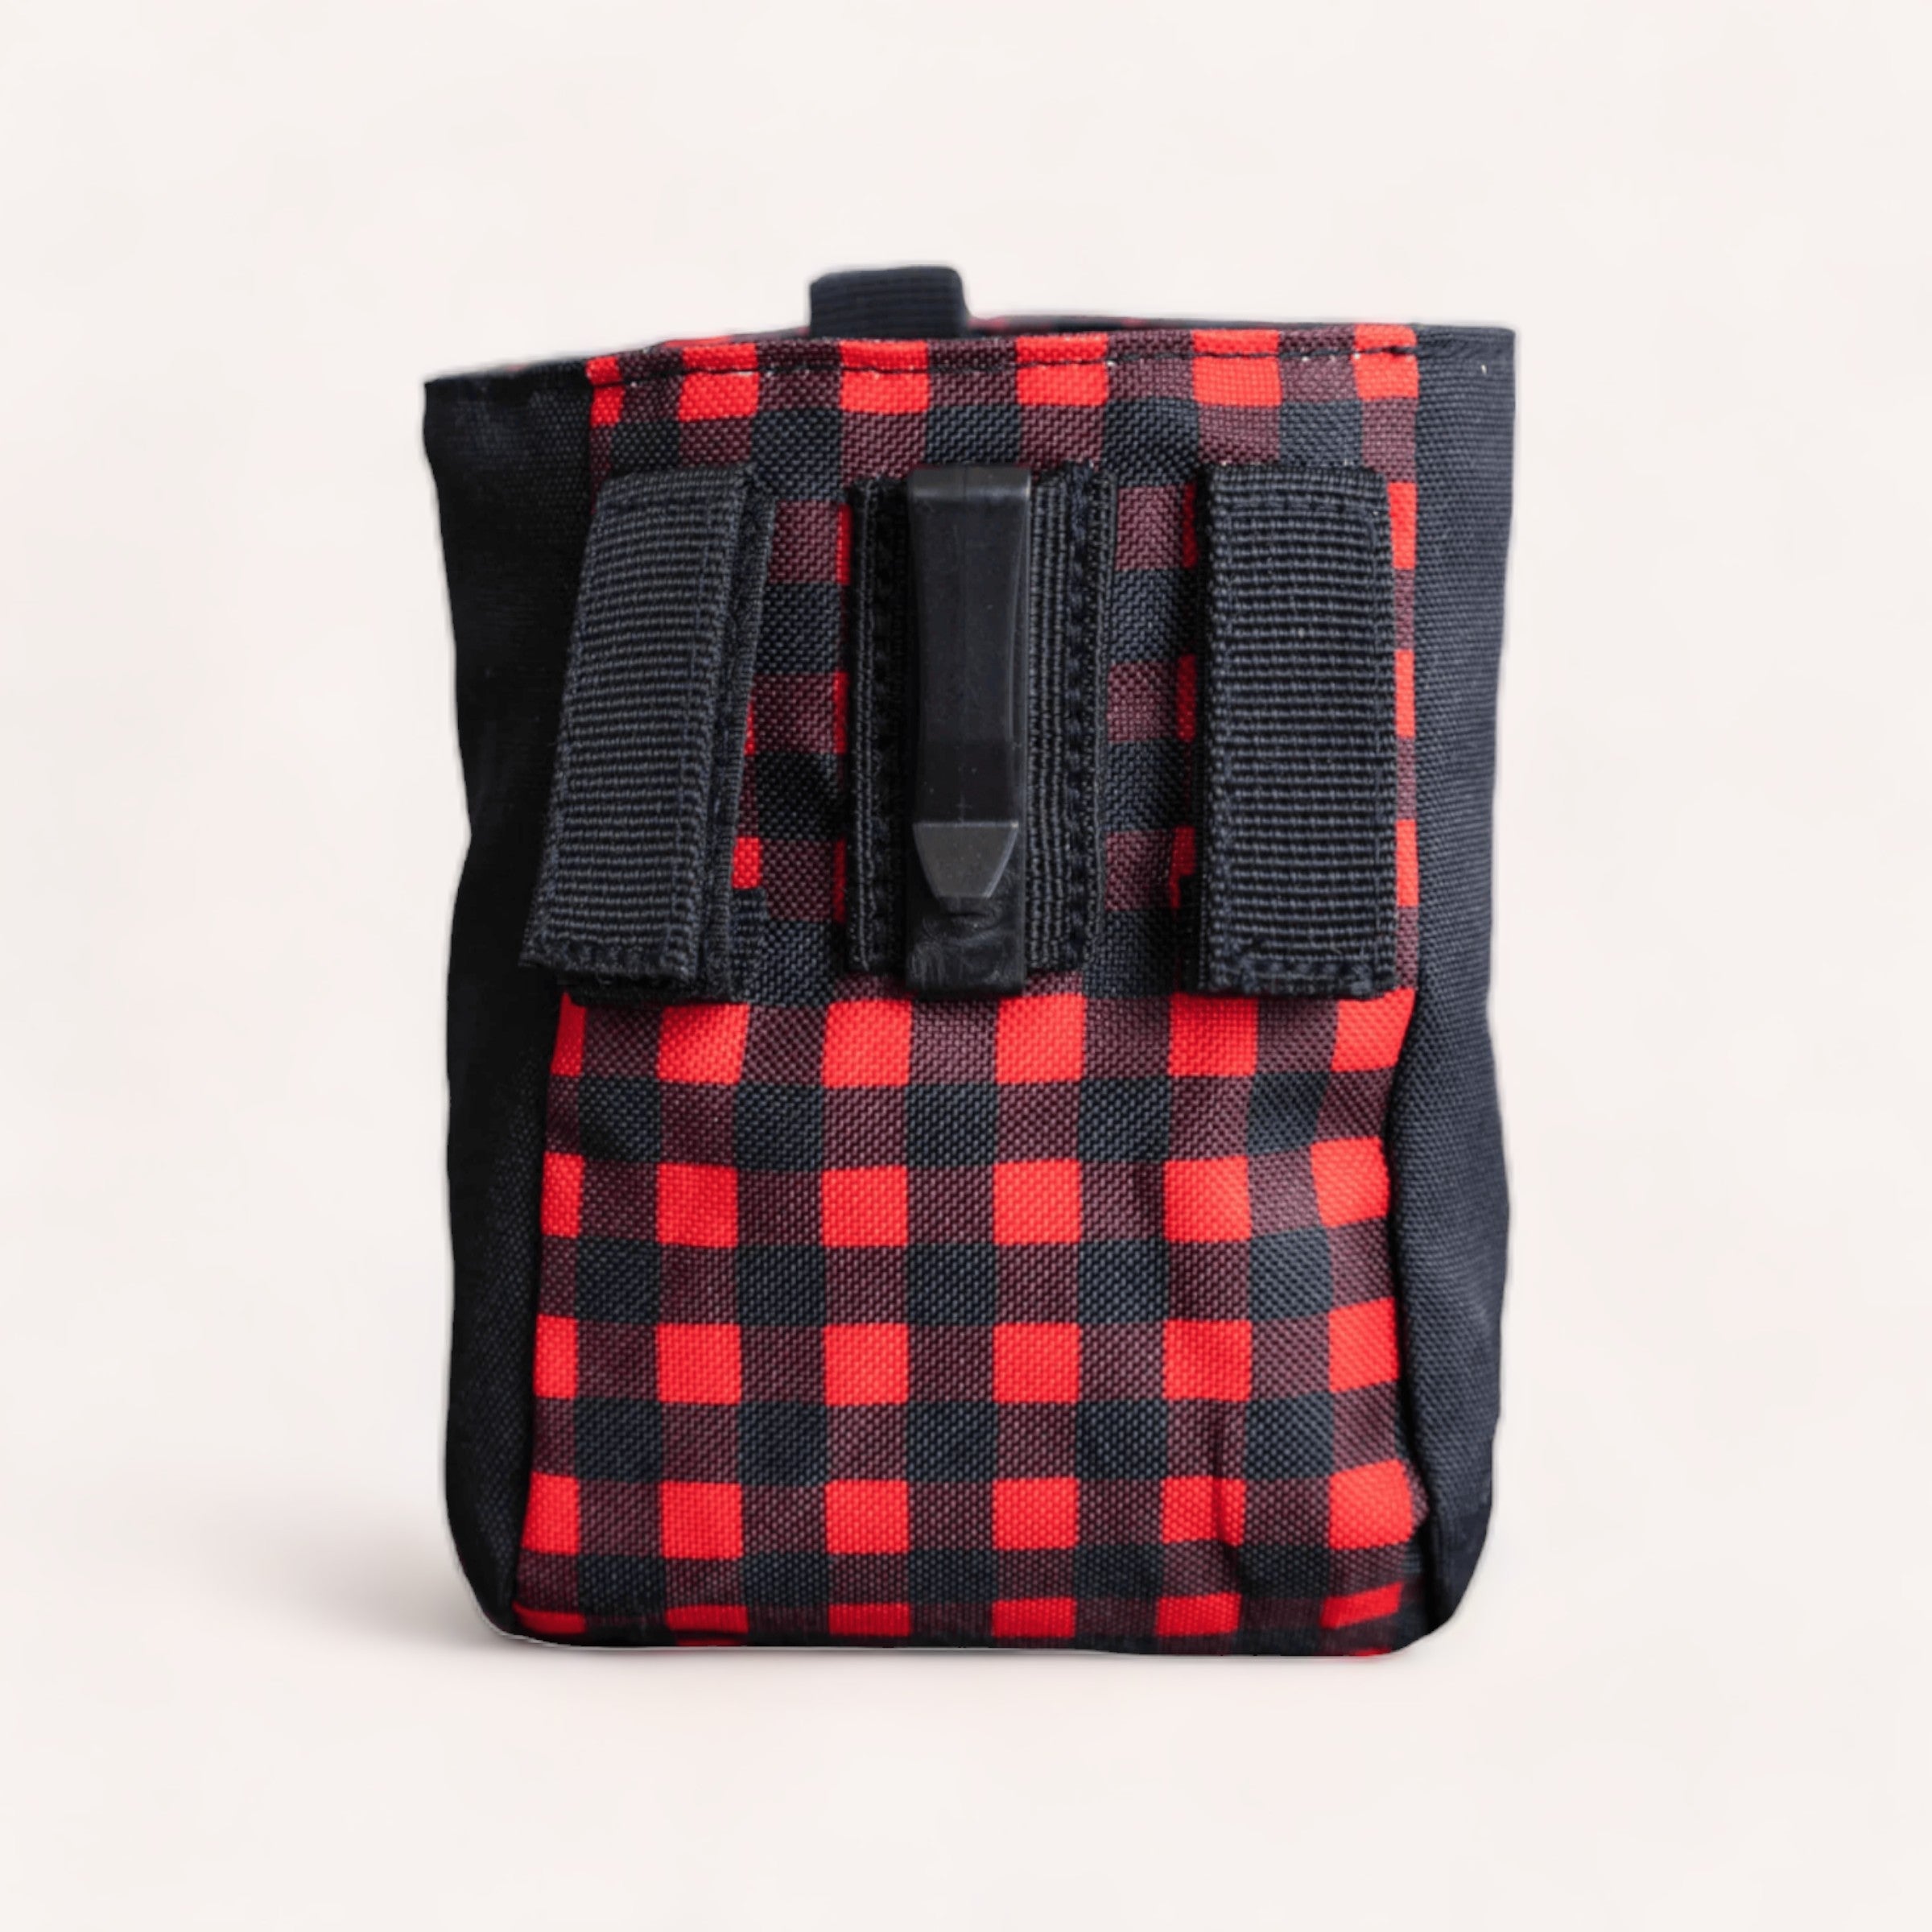 A red and black checkered, durable backpack with a front Velcro flap and Buffalo Treat Pouch on a neutral background by Wolves of Wellington.